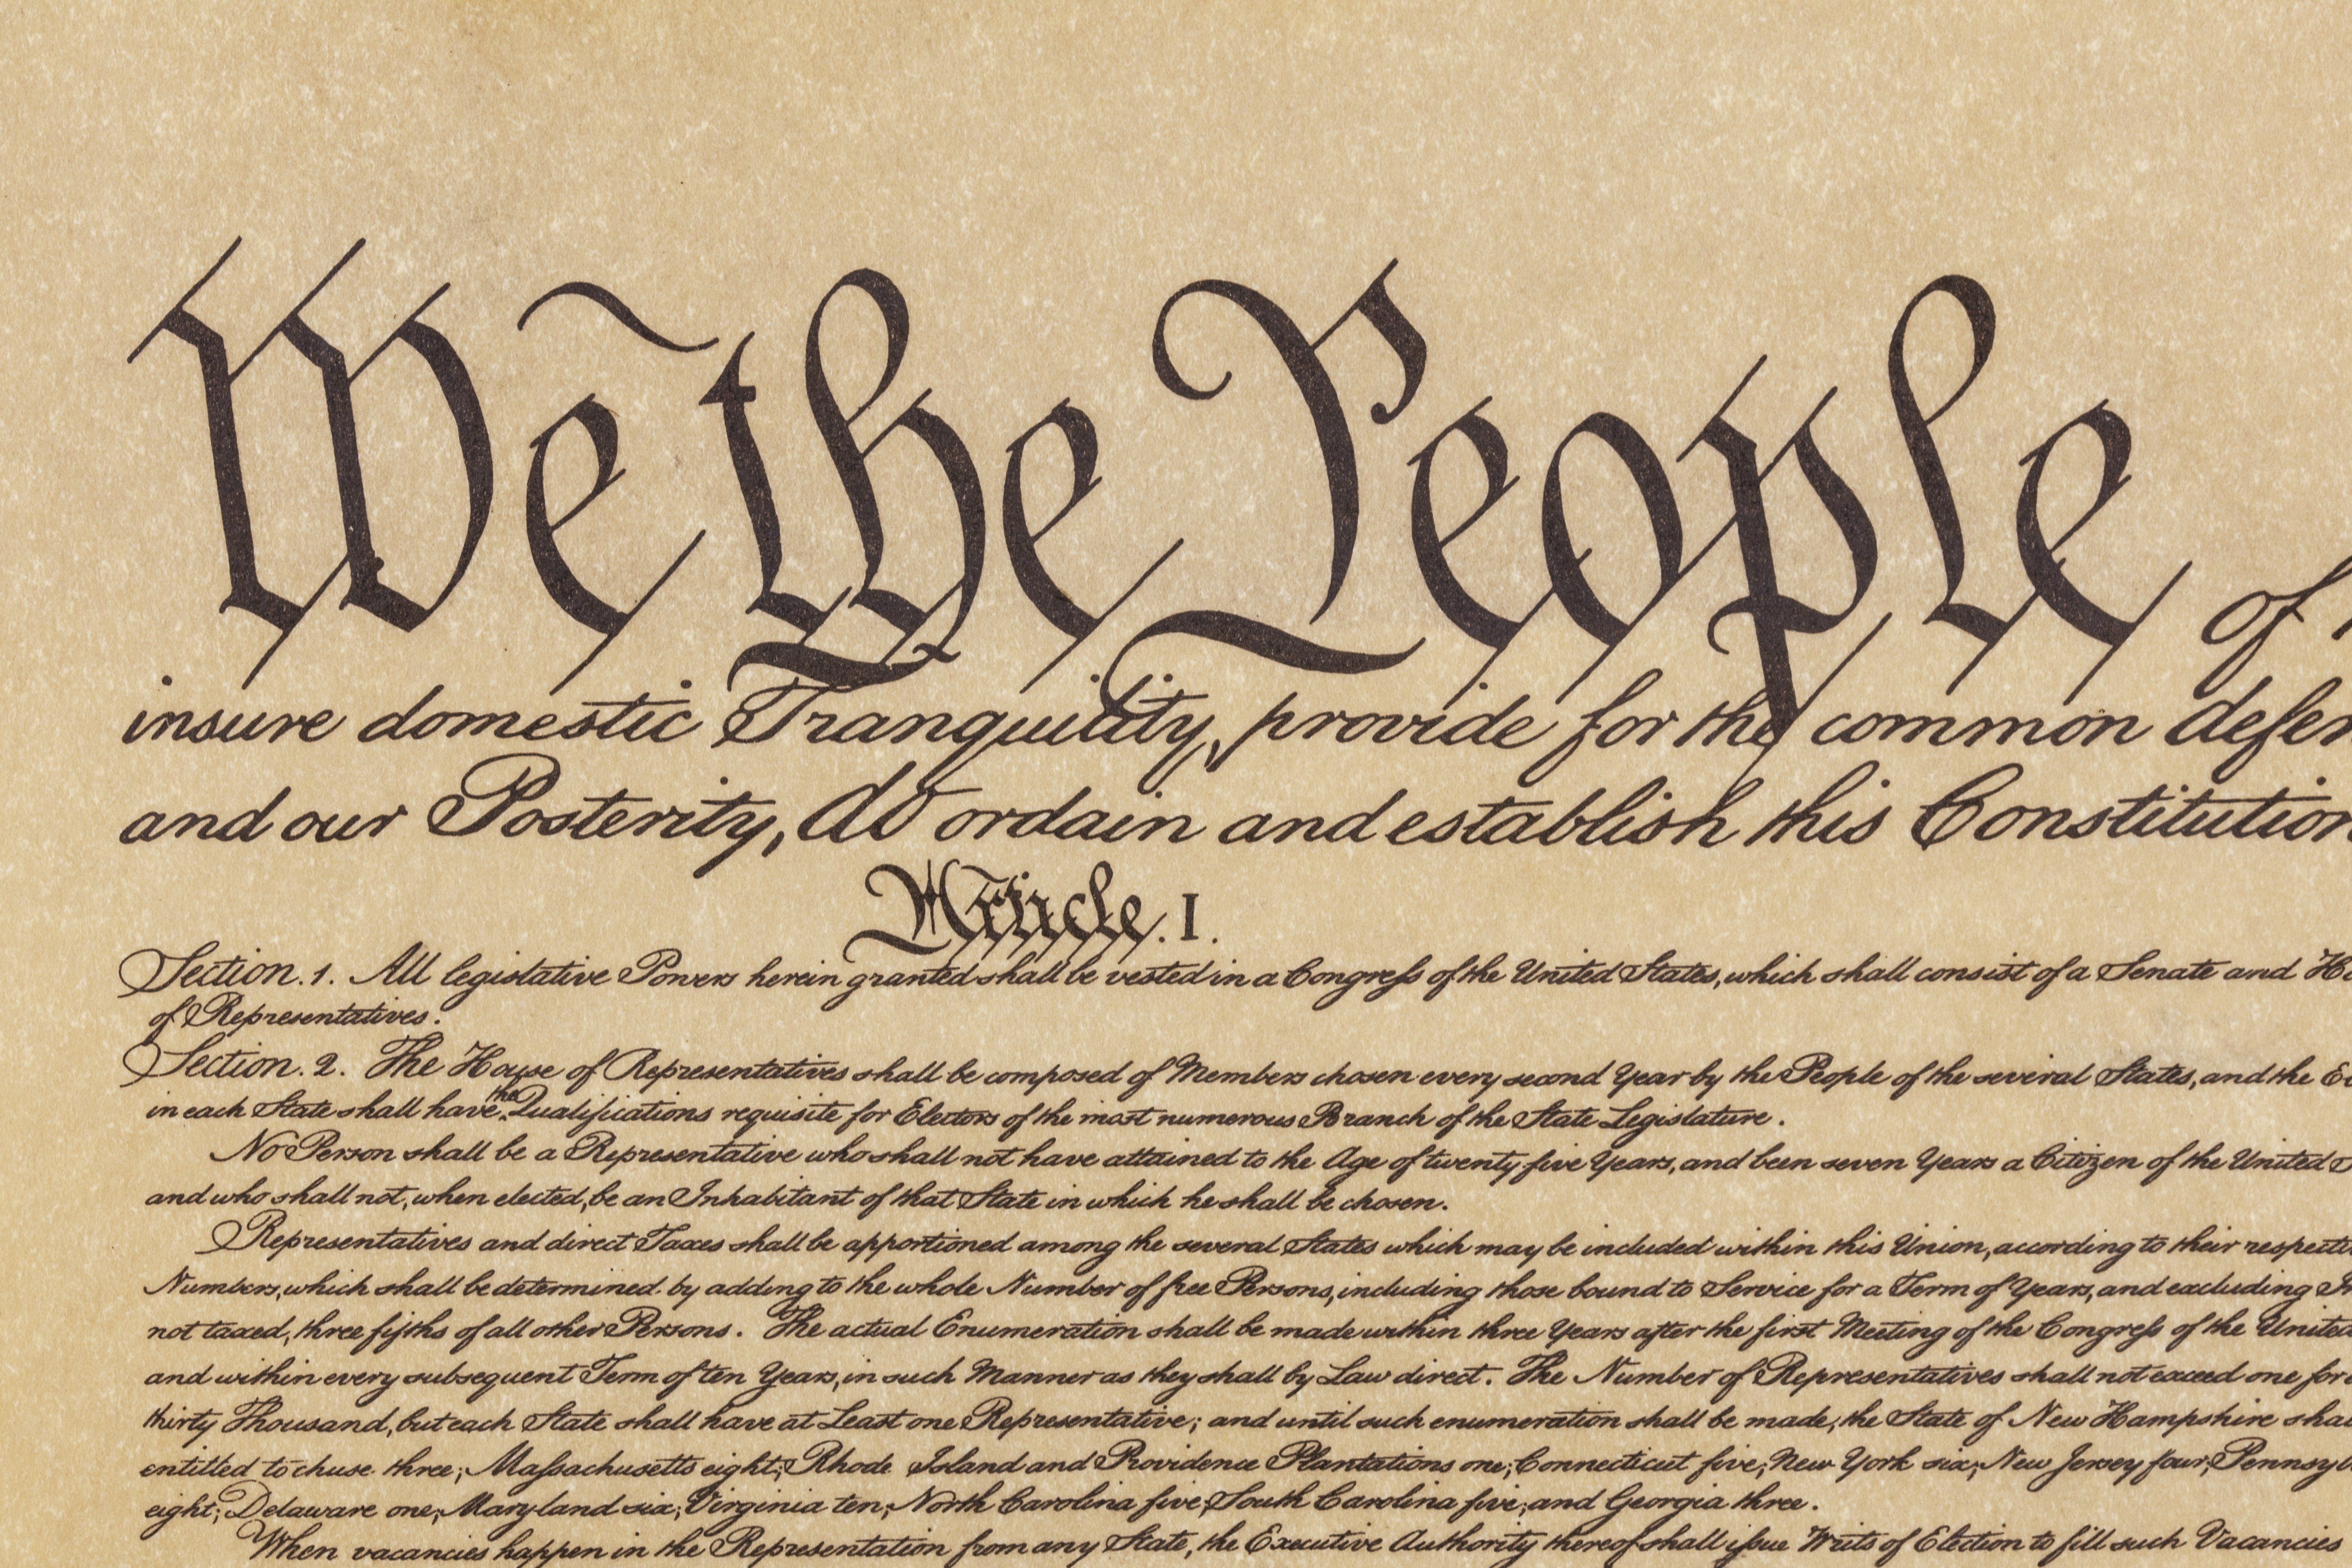 In age of polarization, find inspiration in the Preamble - The Fulcrum